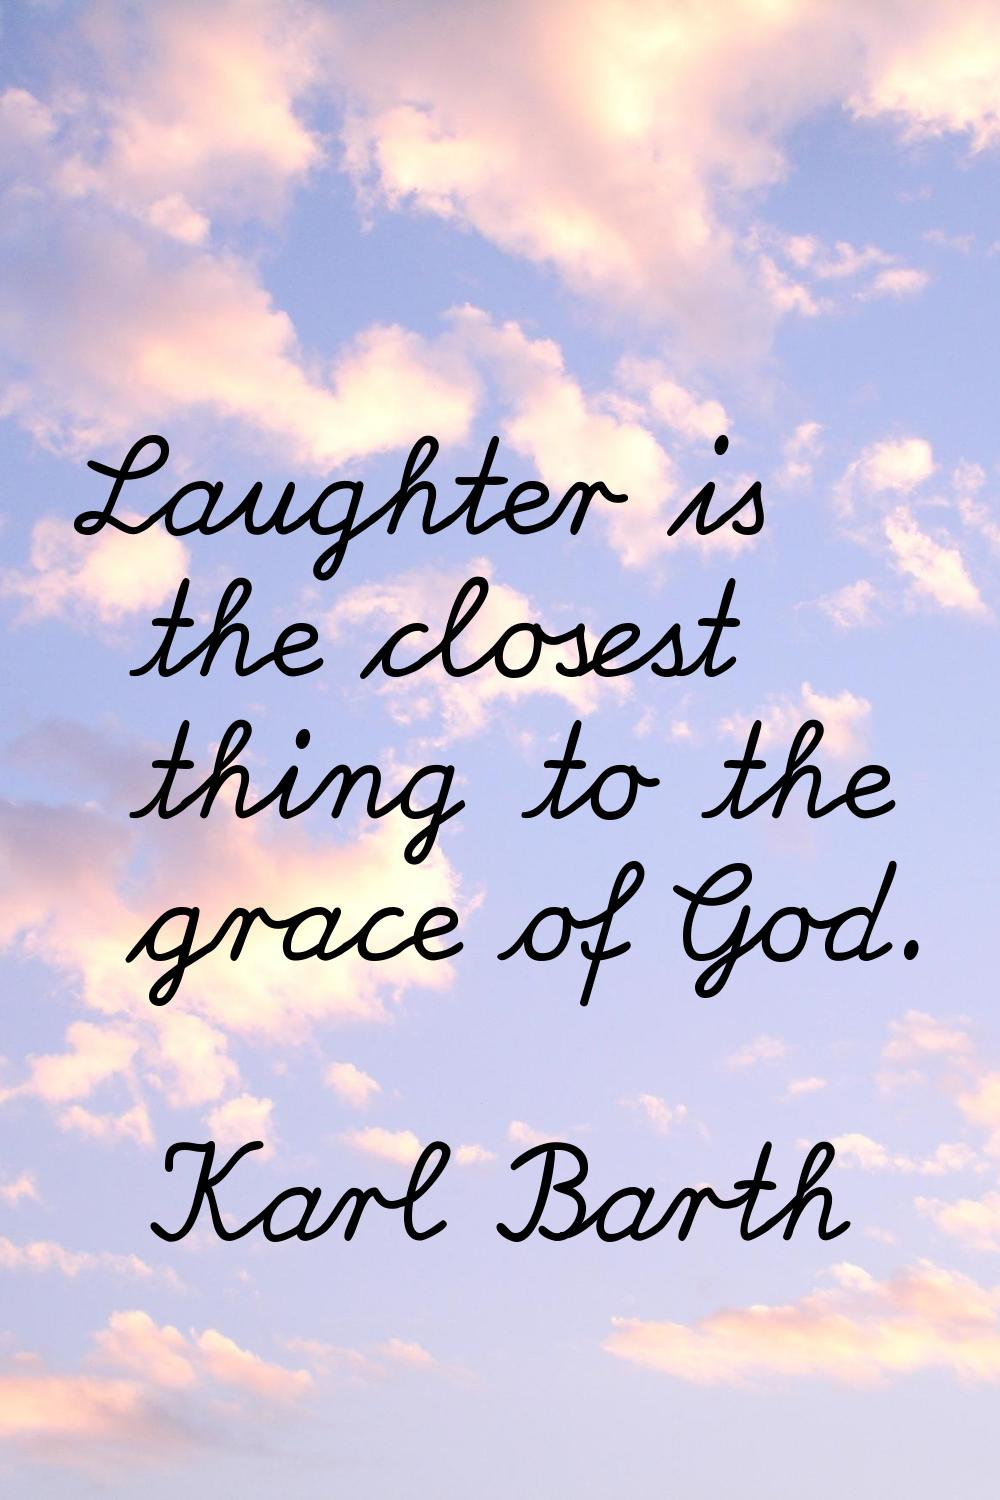 Laughter is the closest thing to the grace of God.